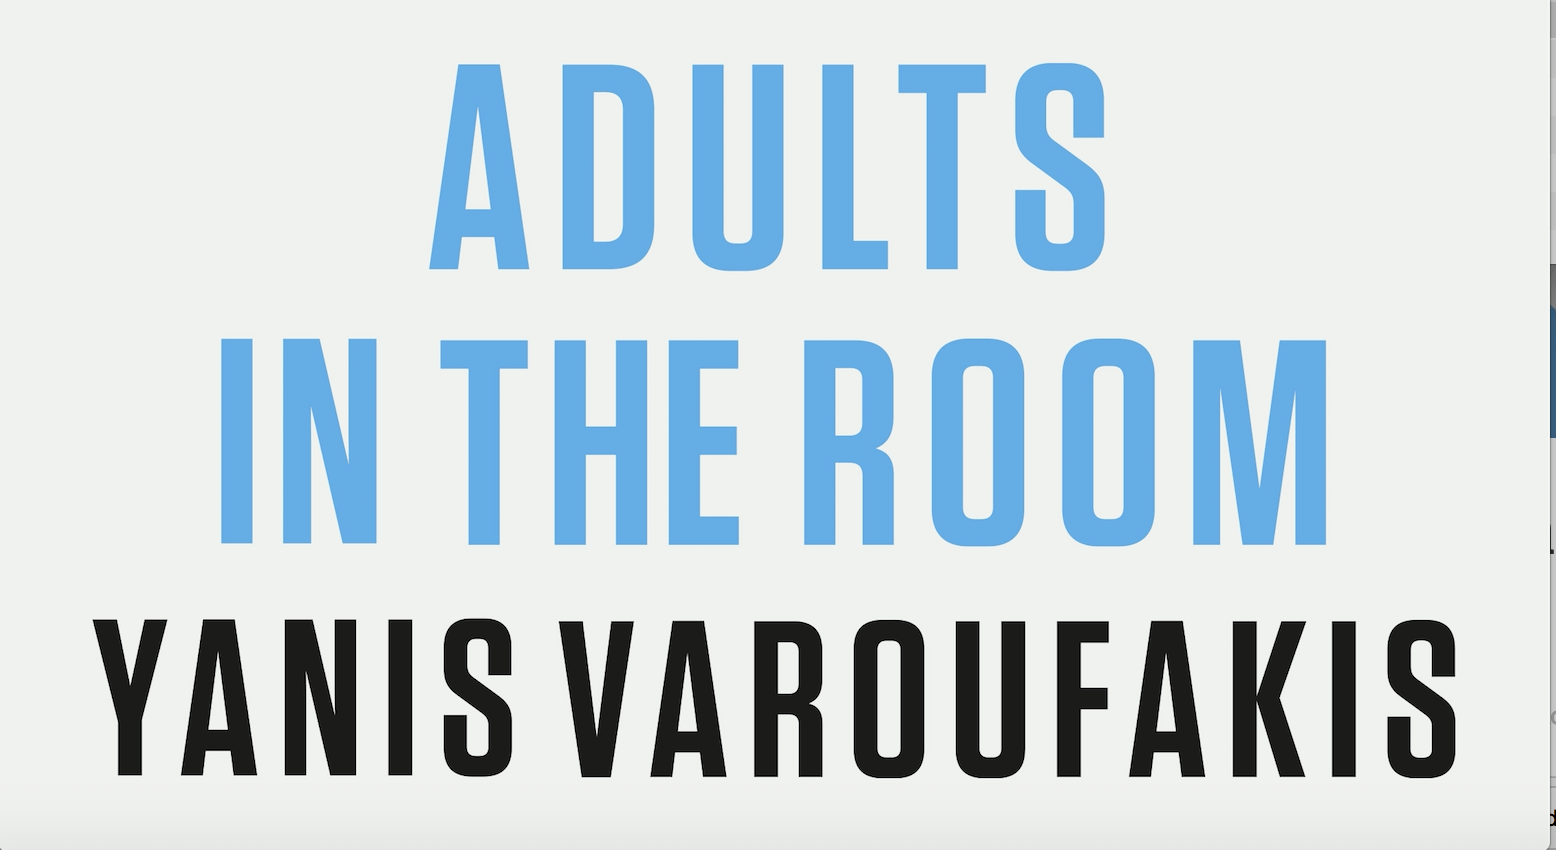 Was defeat inevitable? A review of Adam Tooze’s meta-review of ‘Adults in the Room’ [1]